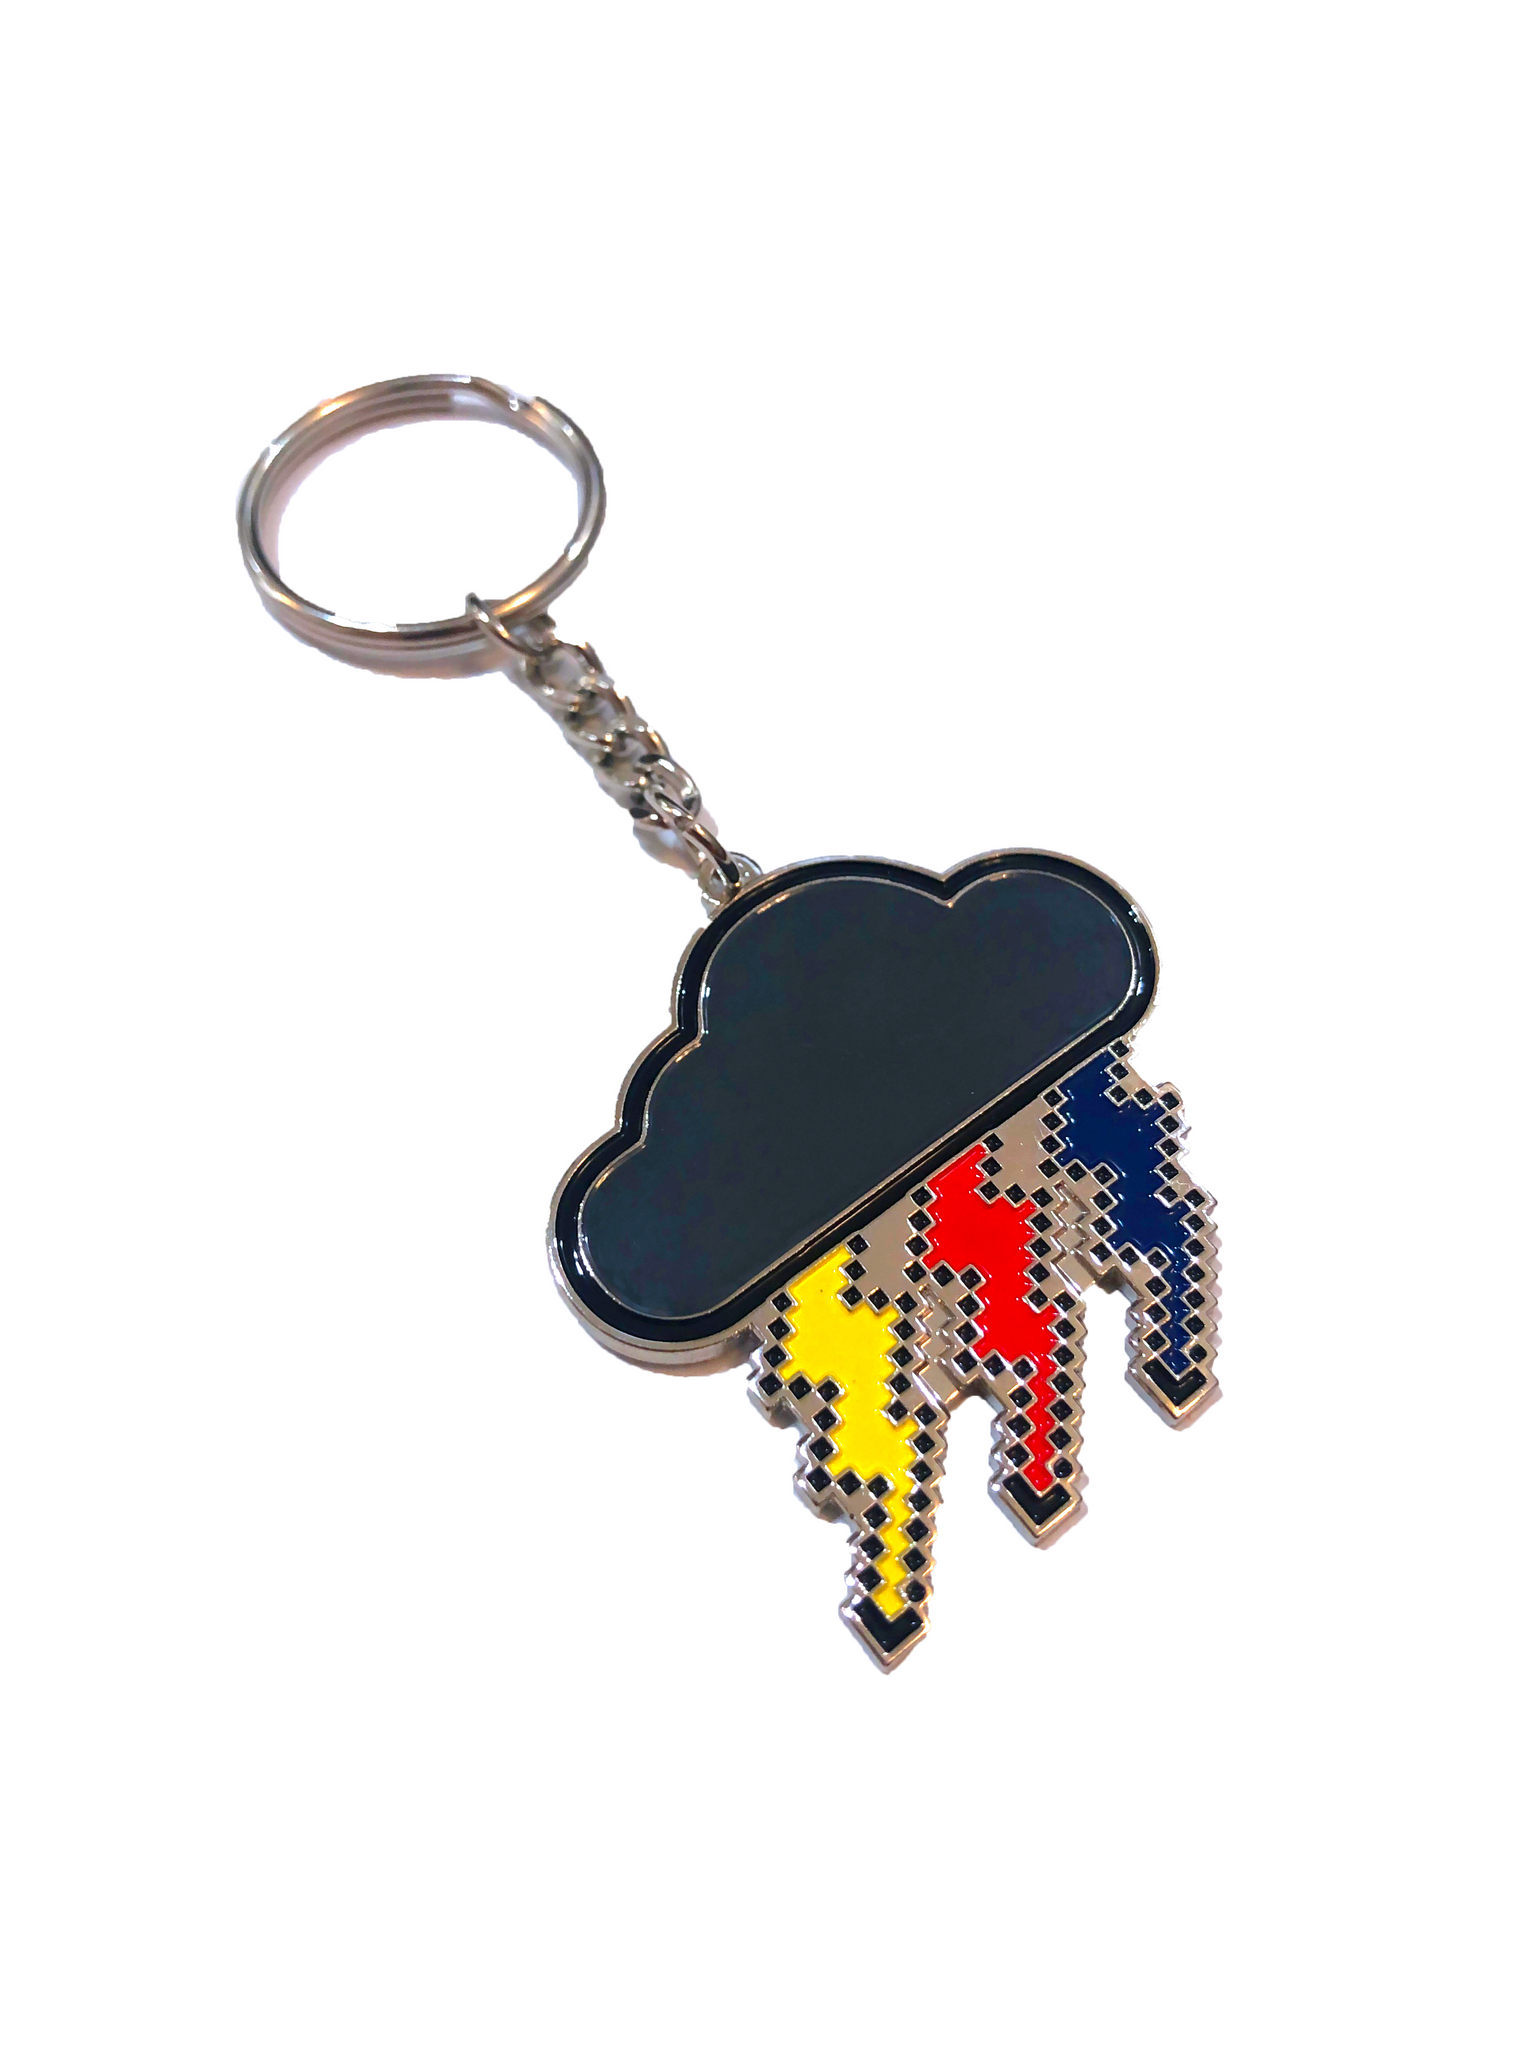 A Real Keychain.